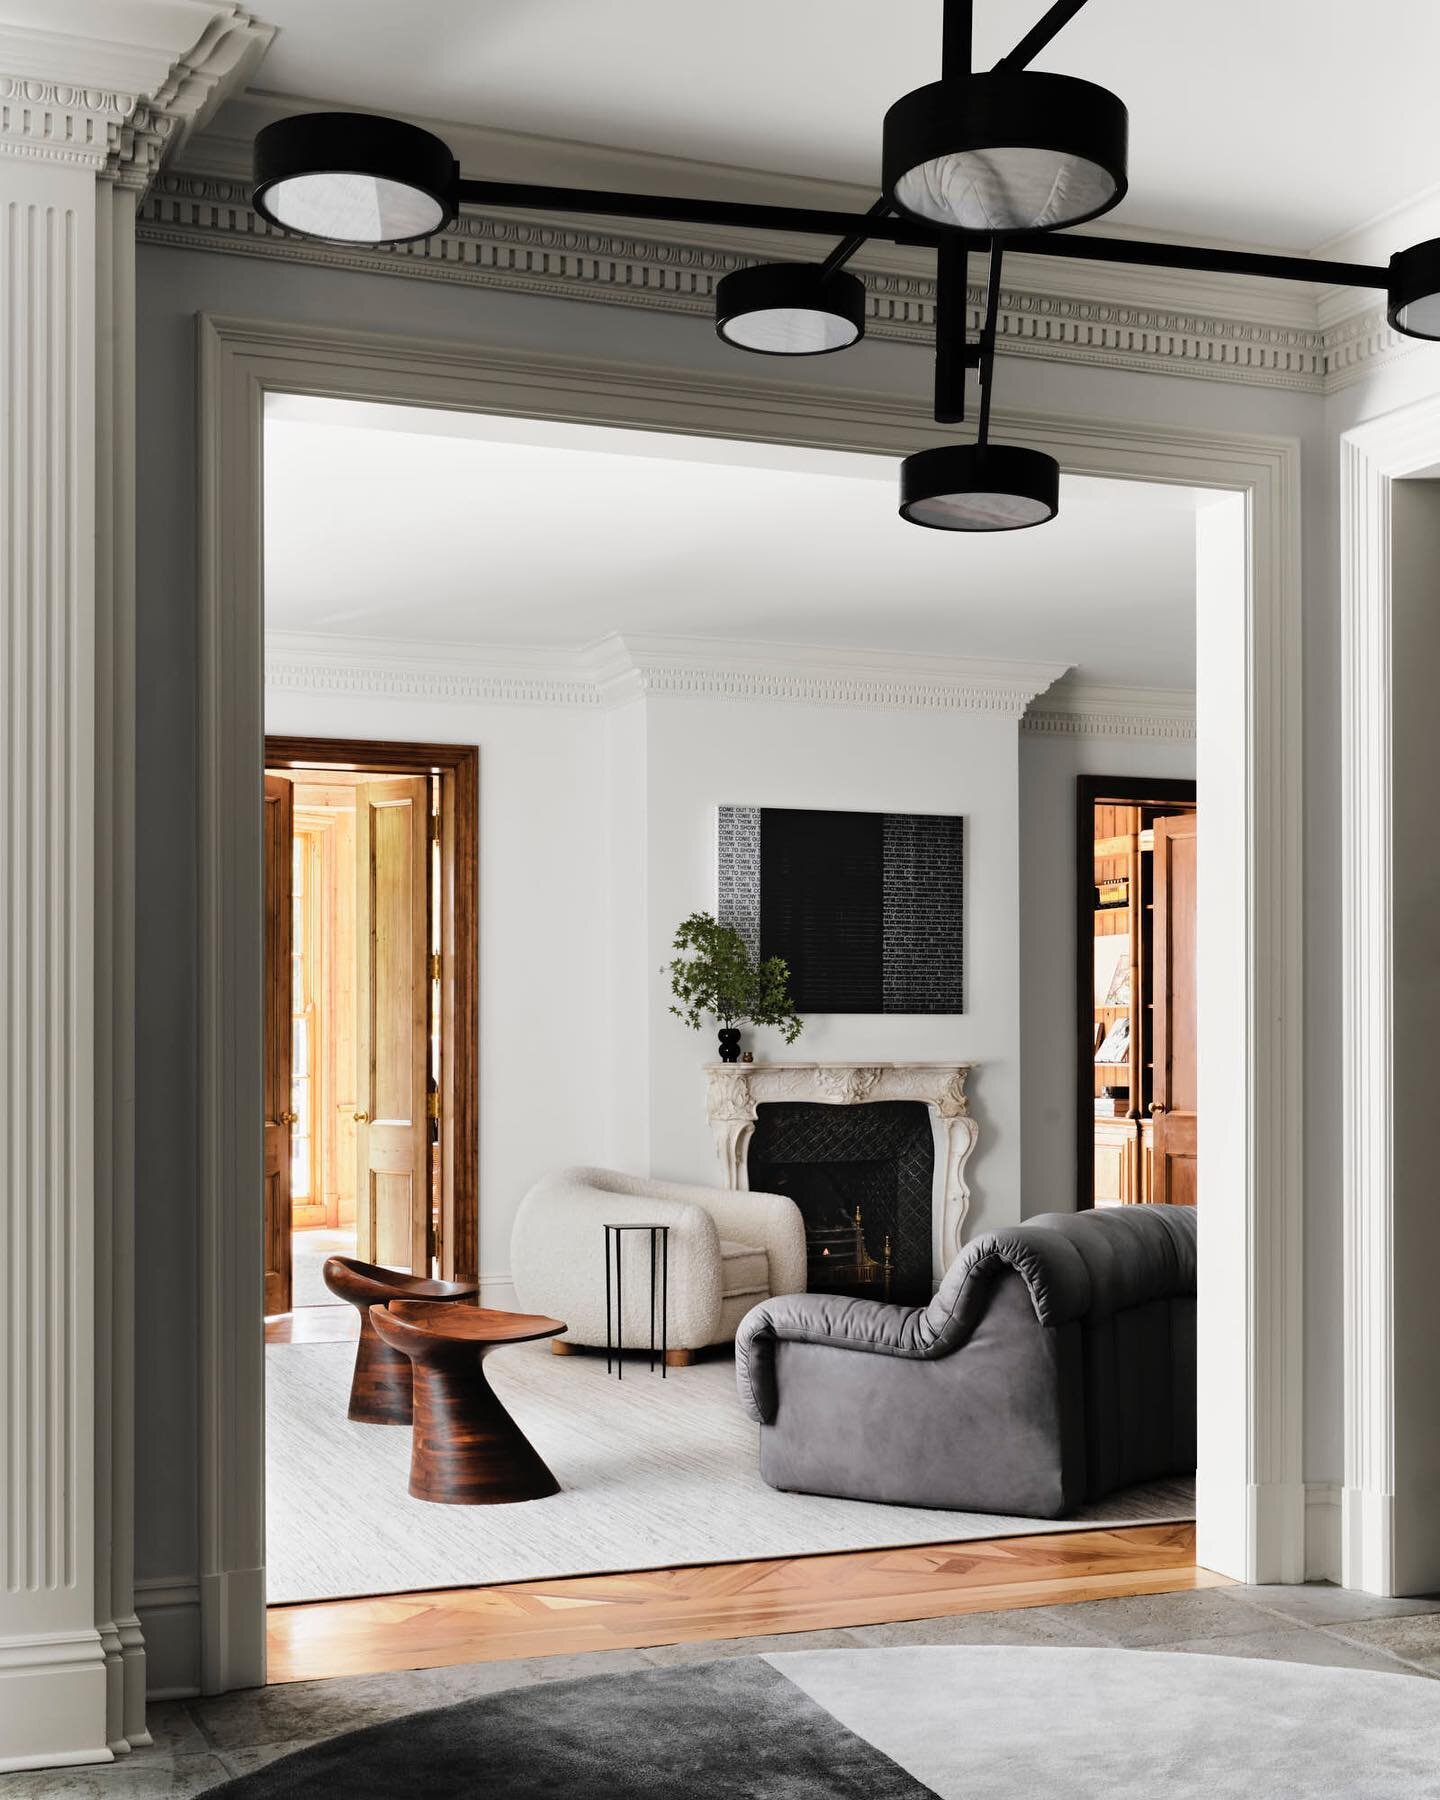 Expanded viewpoint. This serene room designed by @chadcalebdorsey won a 2022 PaperCity Design Award for Best Singular Space for Living or Great Room, Recreation, Entertainment, Media Room. 
Judge&rsquo;s Remarks: &ldquo;Wow. Very rich, bold, and mode